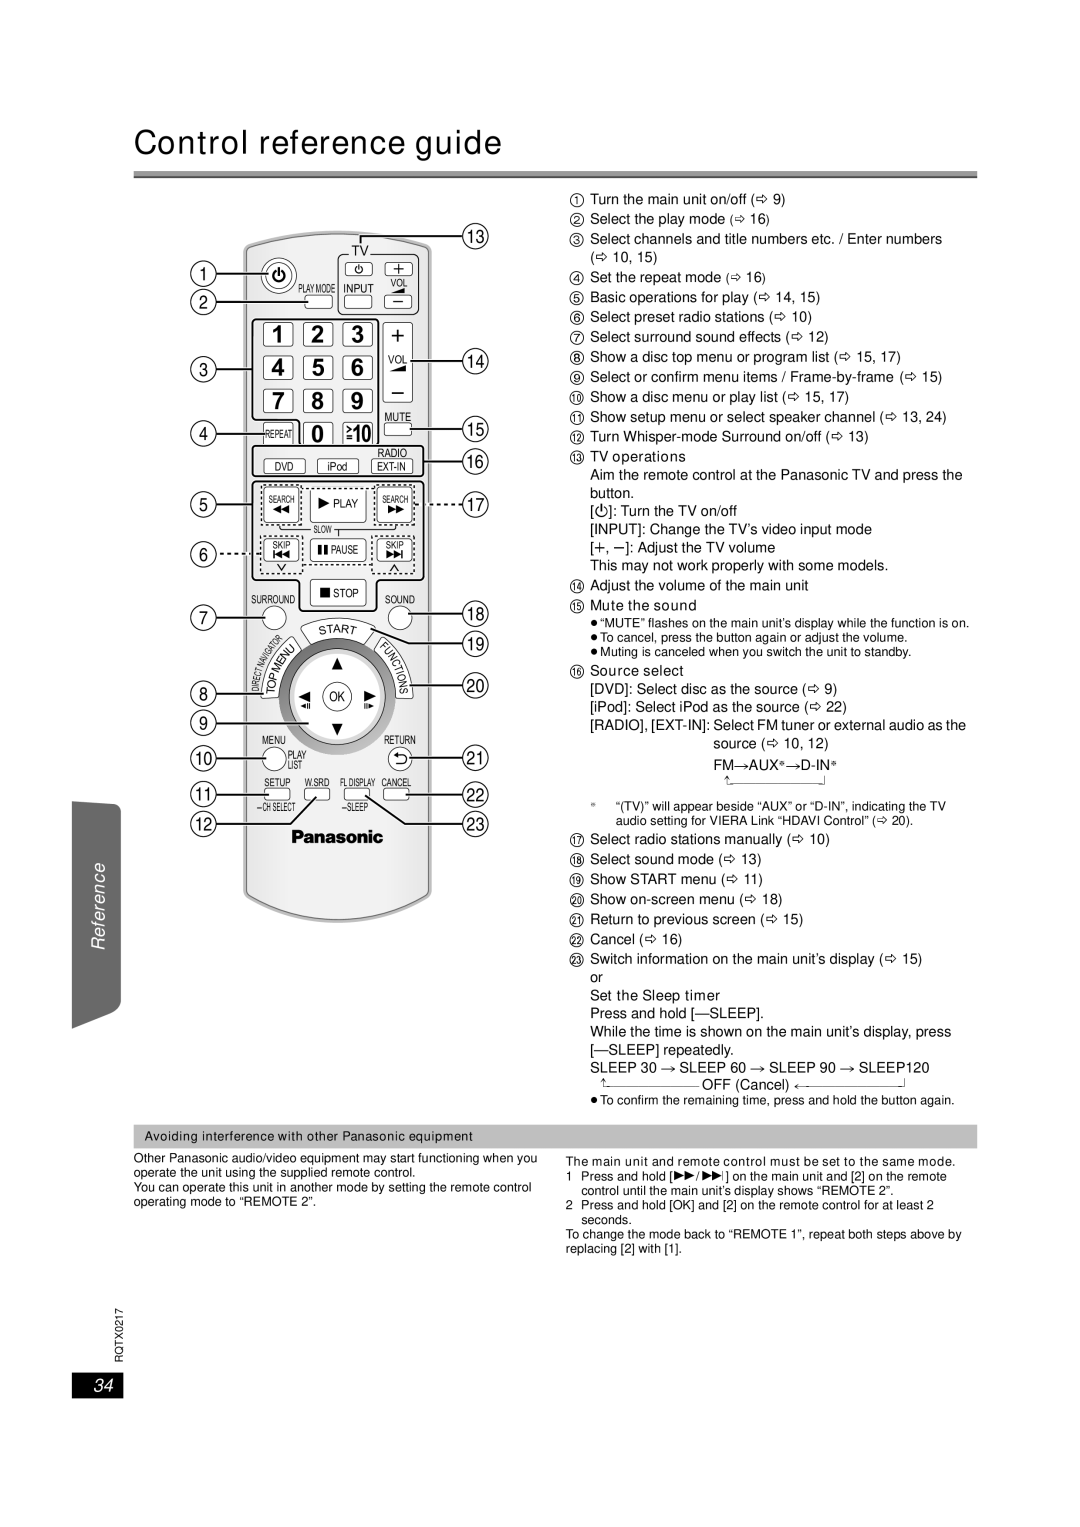 Panasonic SC-PT464 Control reference guide, = TV operations, @ Source select, Set the Sleep timer Press and hold -SLEEP 